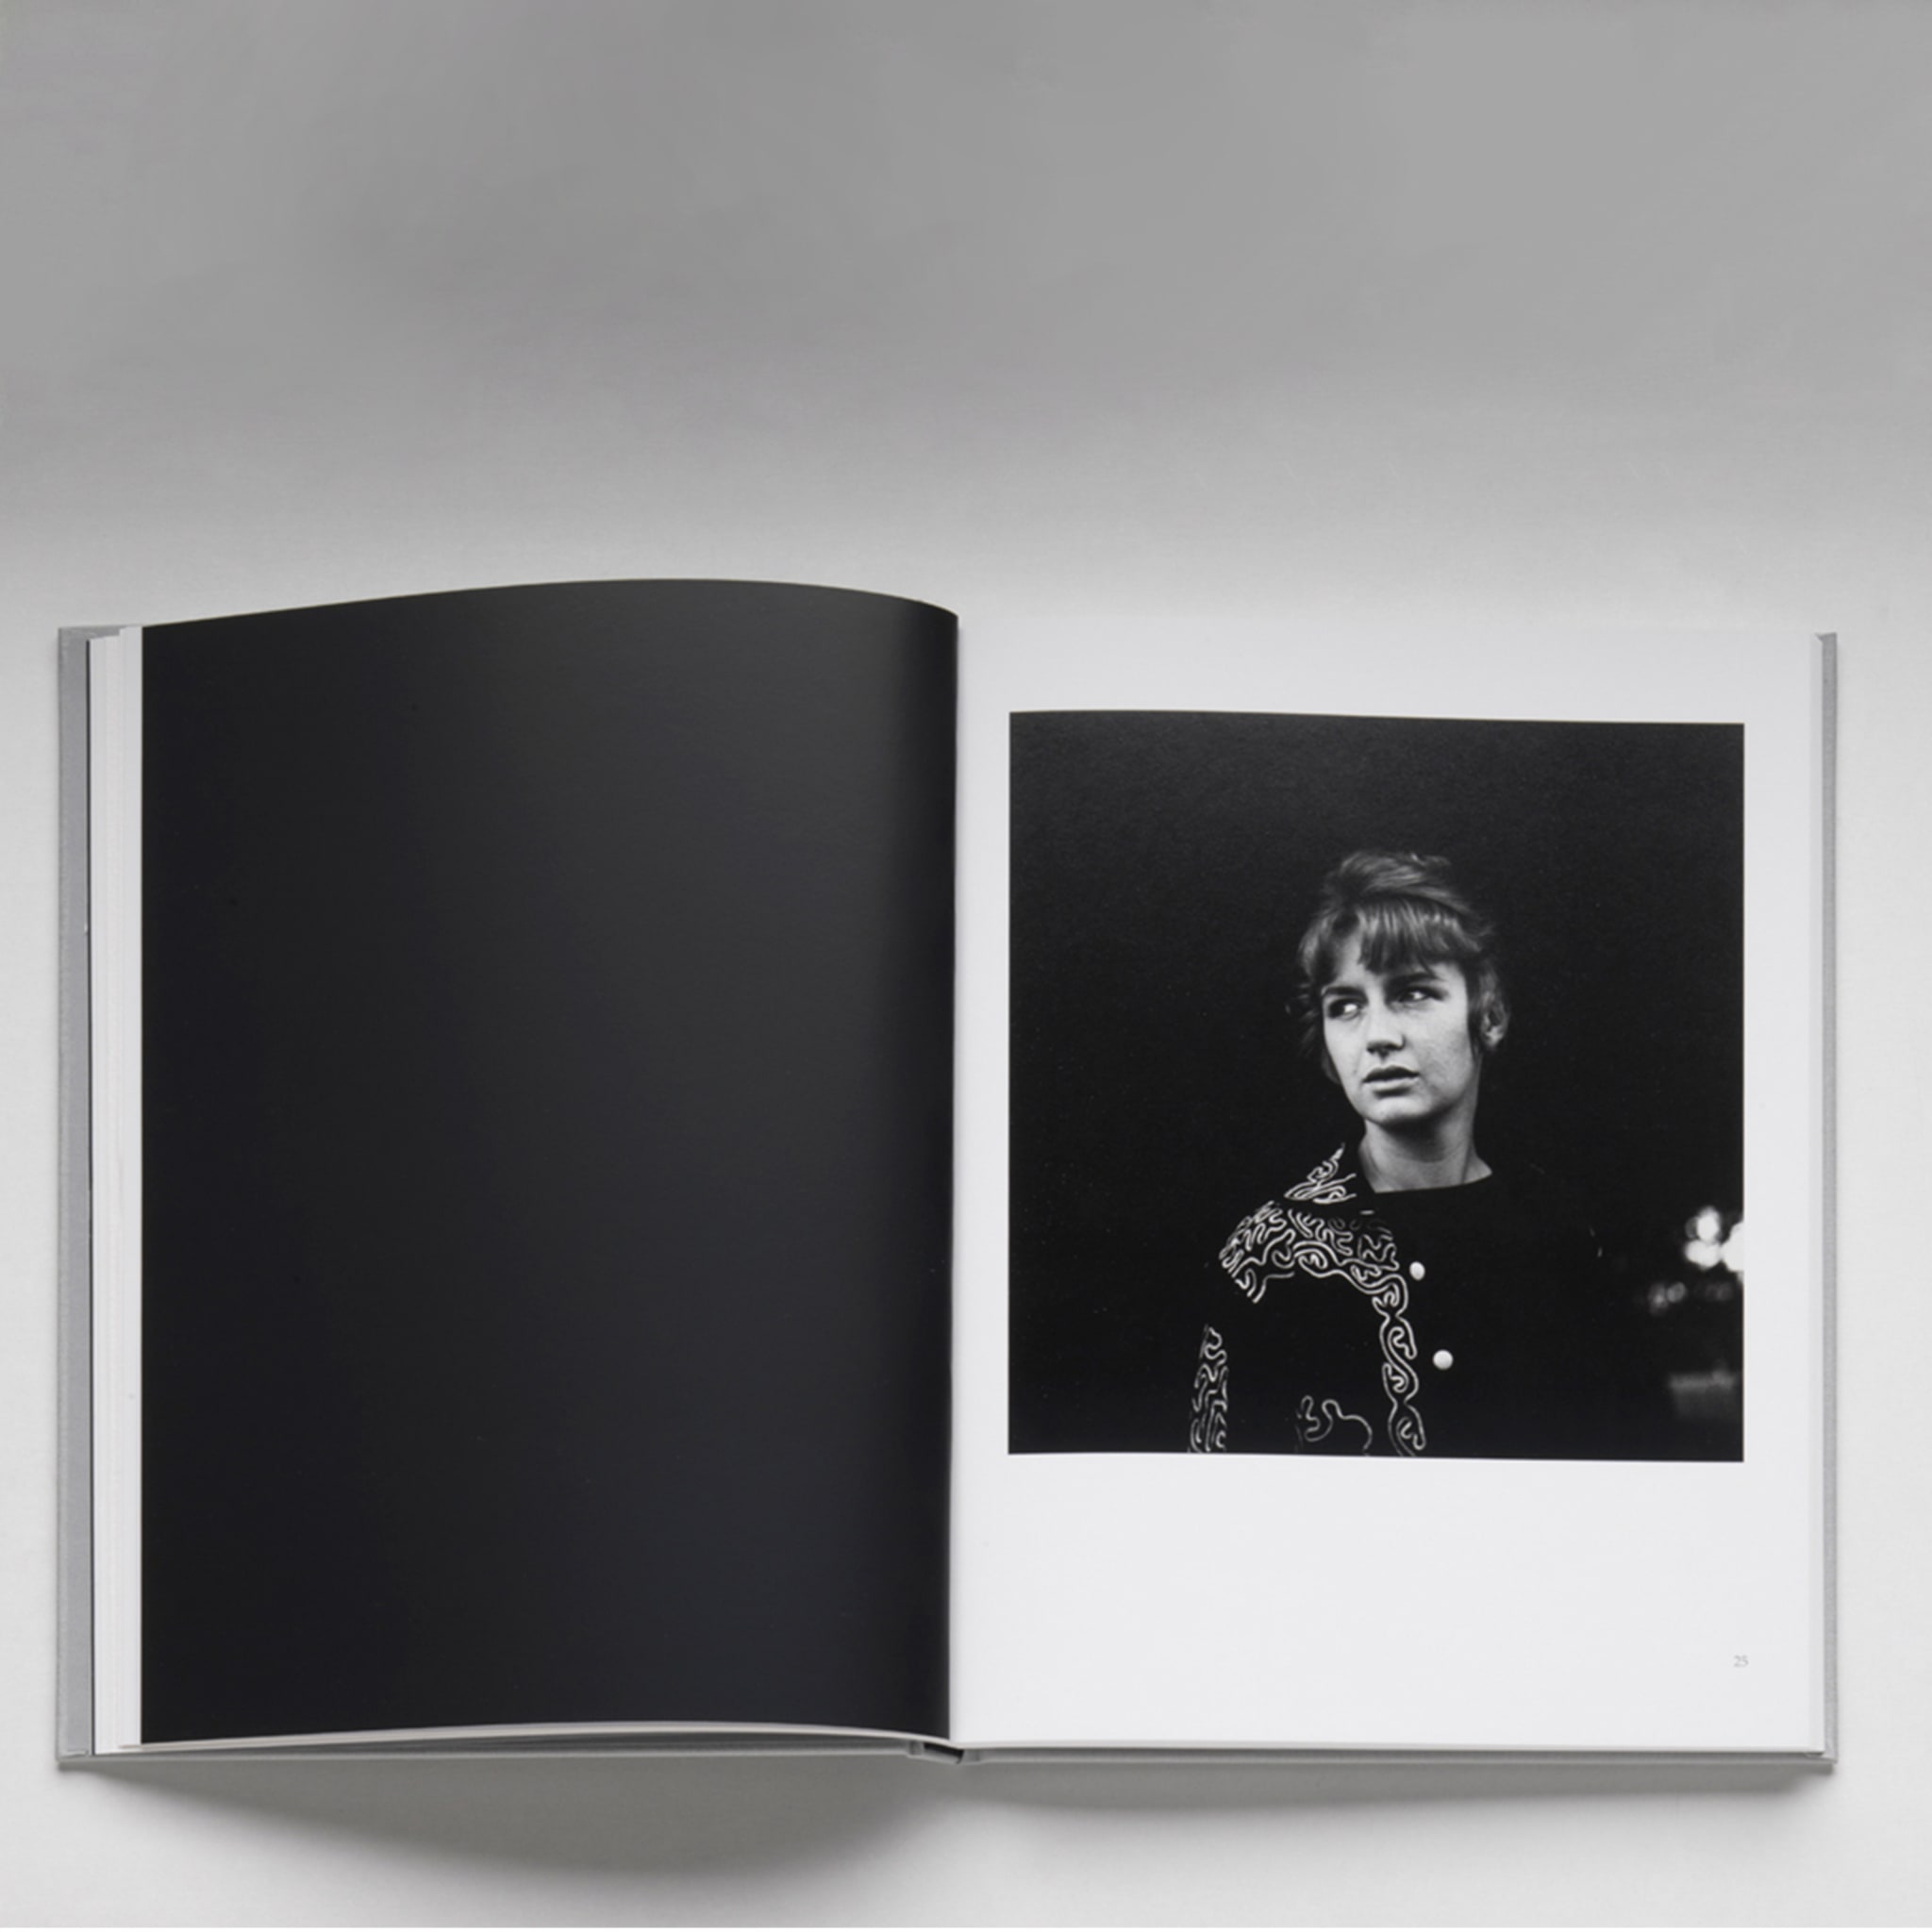  The Beats - Limited Edition Box Set #2 – Larry Fink - Limited Edition of 25 copies - Alternative view 2